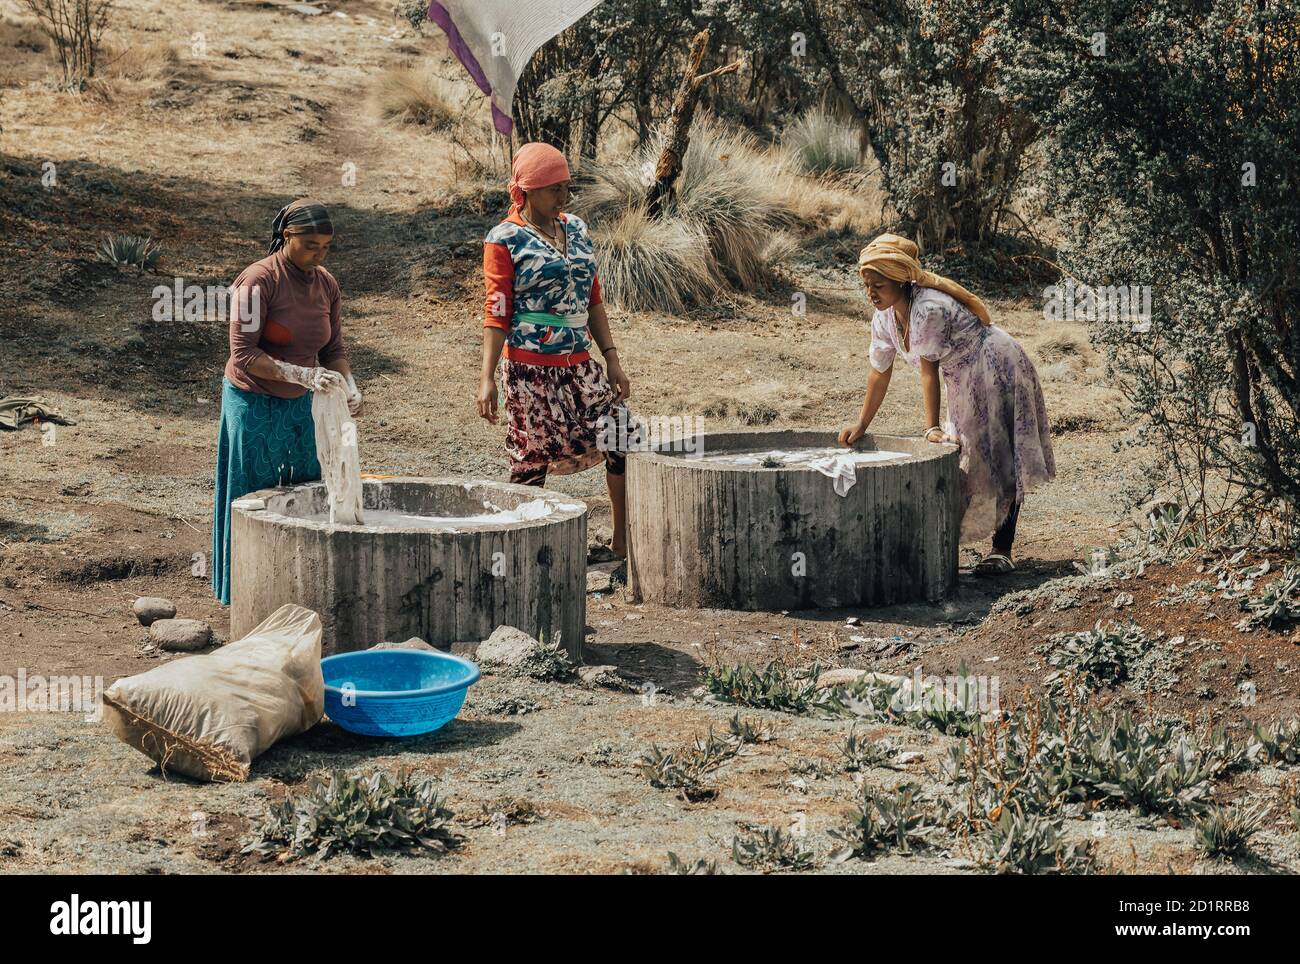 https://c8.alamy.com/comp/2D1RRB8/simien-mountain-ethiopia-april-25th2019-ethiopian-women-wash-clothes-in-the-traditional-way-outdoors-in-simien-mountains-ethiopia-april-25-2019-2D1RRB8.jpg